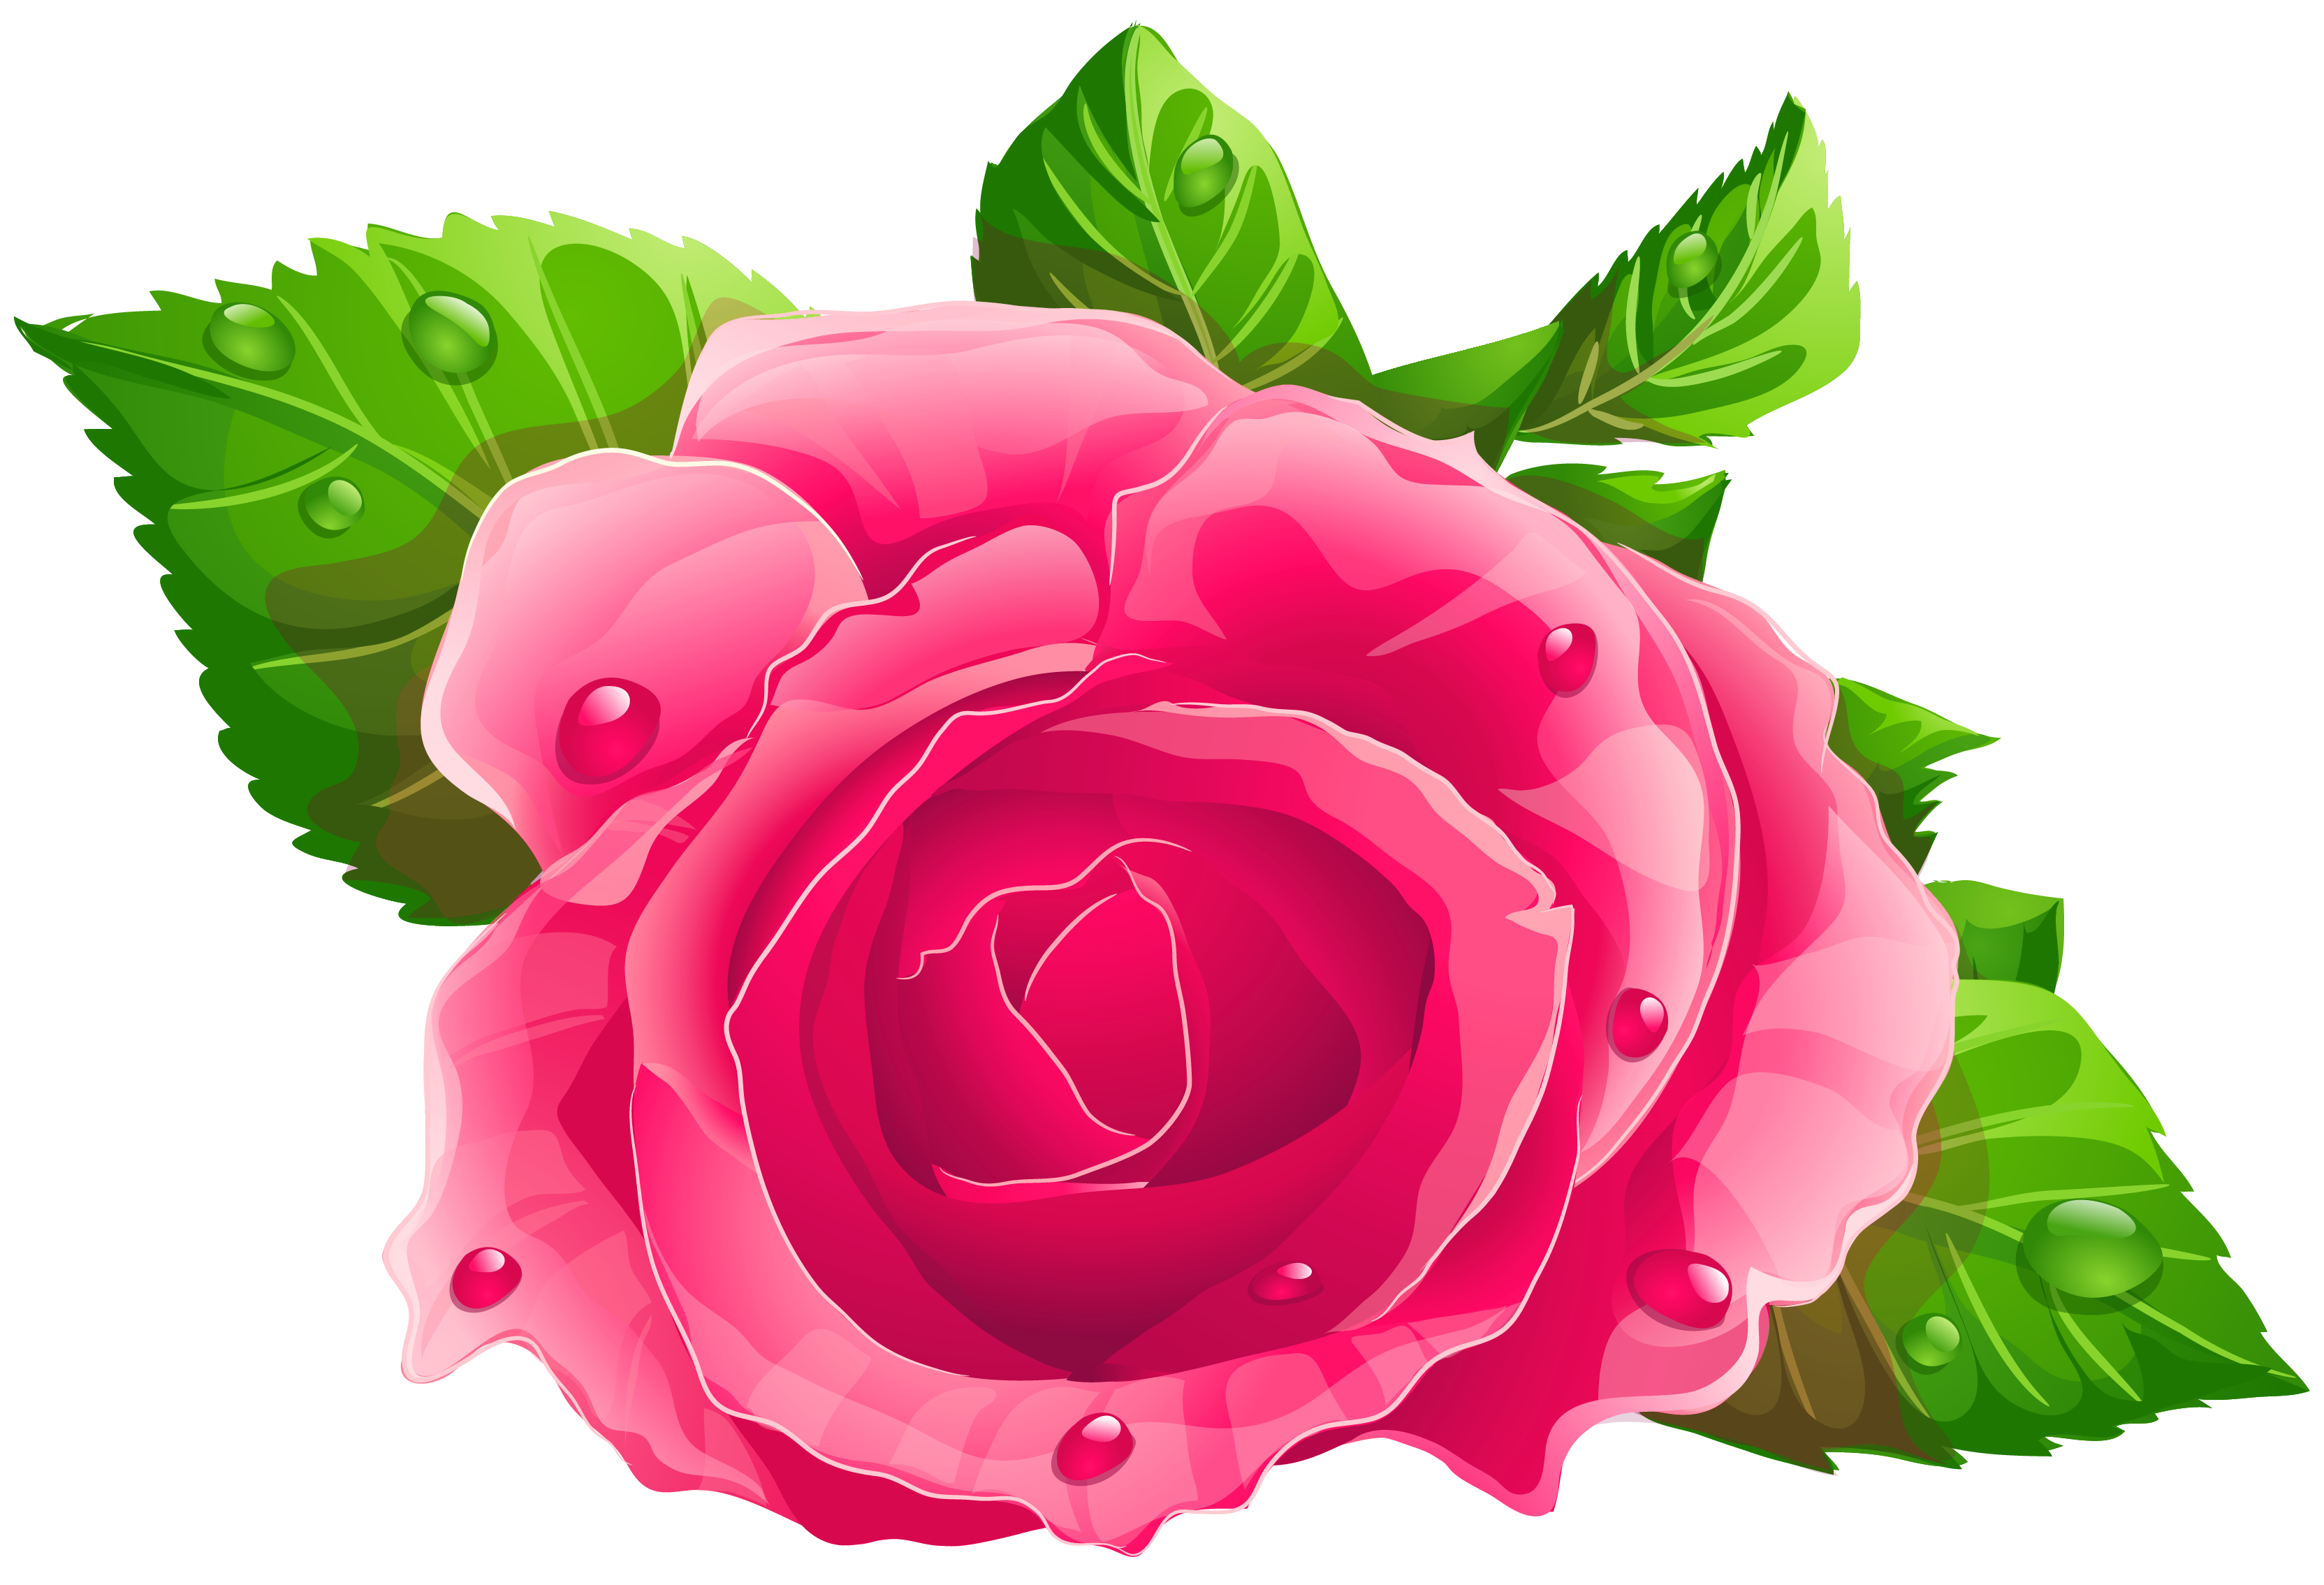 Image detail for -Pink Rose A